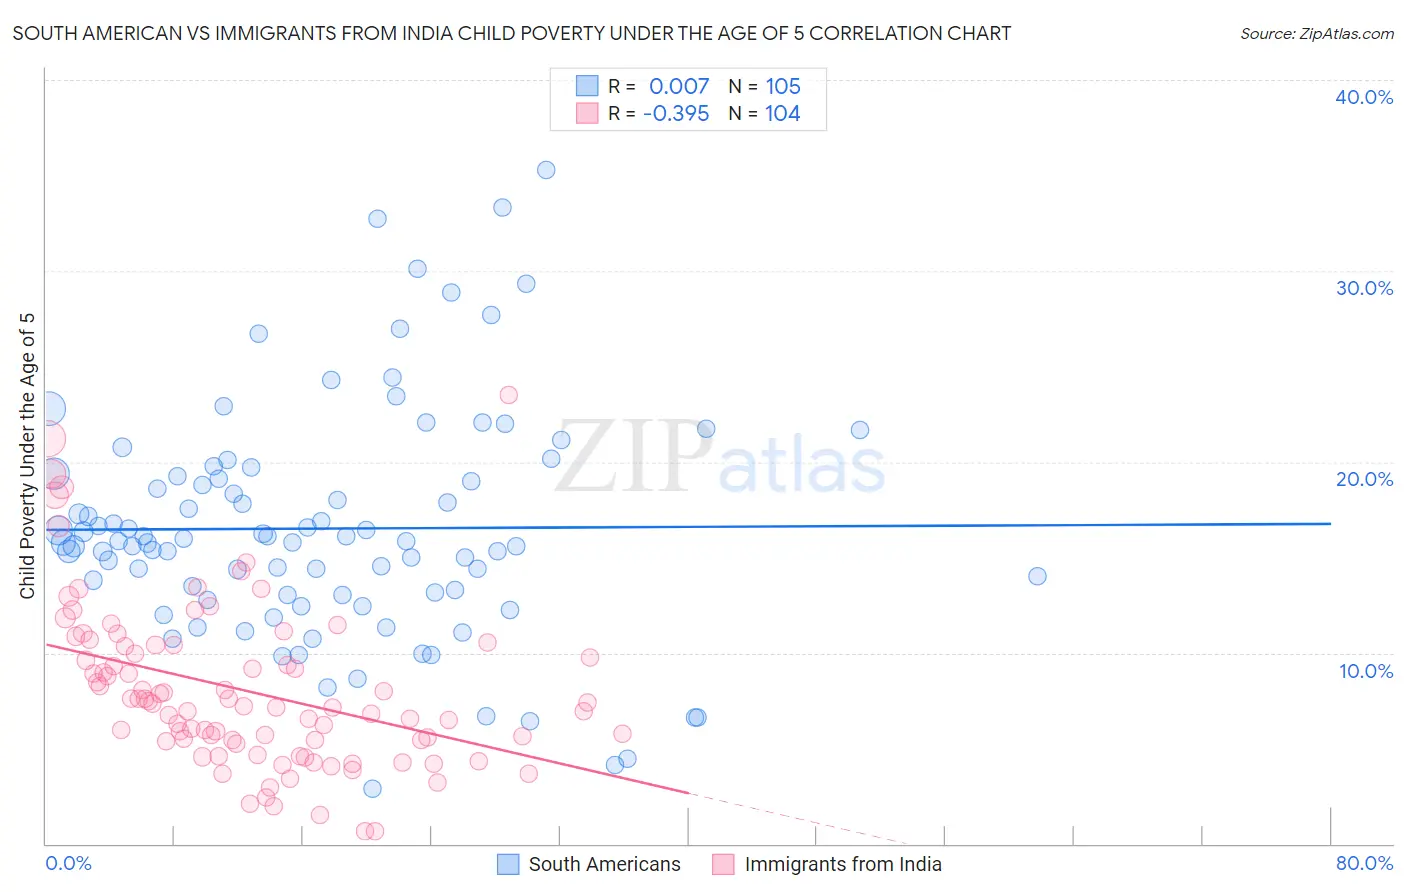 South American vs Immigrants from India Child Poverty Under the Age of 5